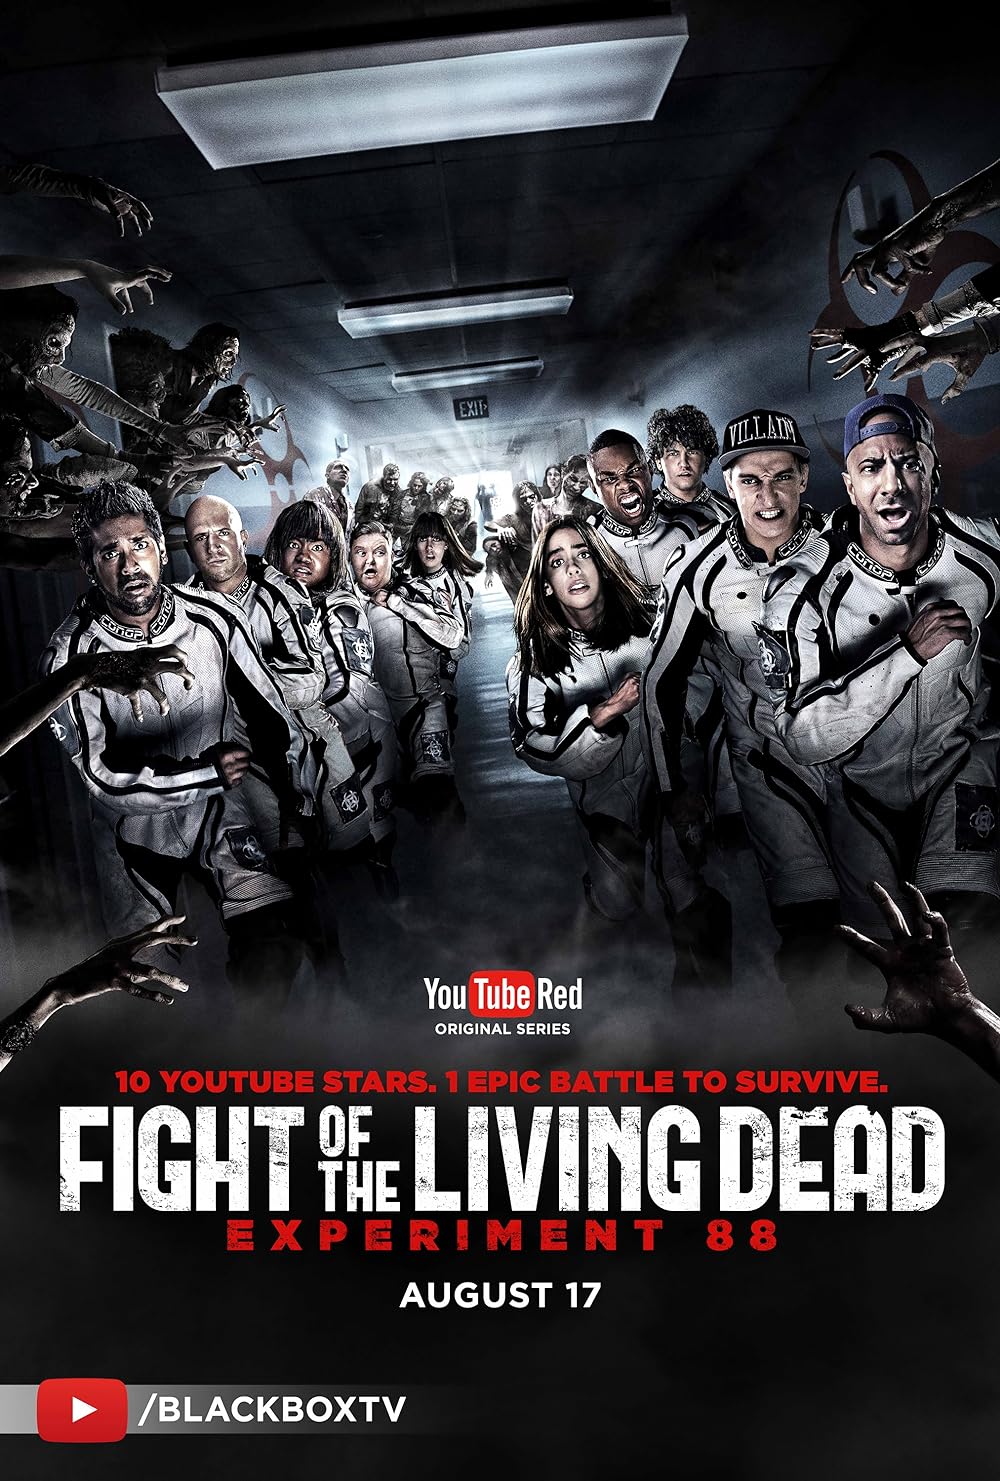 Fight of the Living Dead